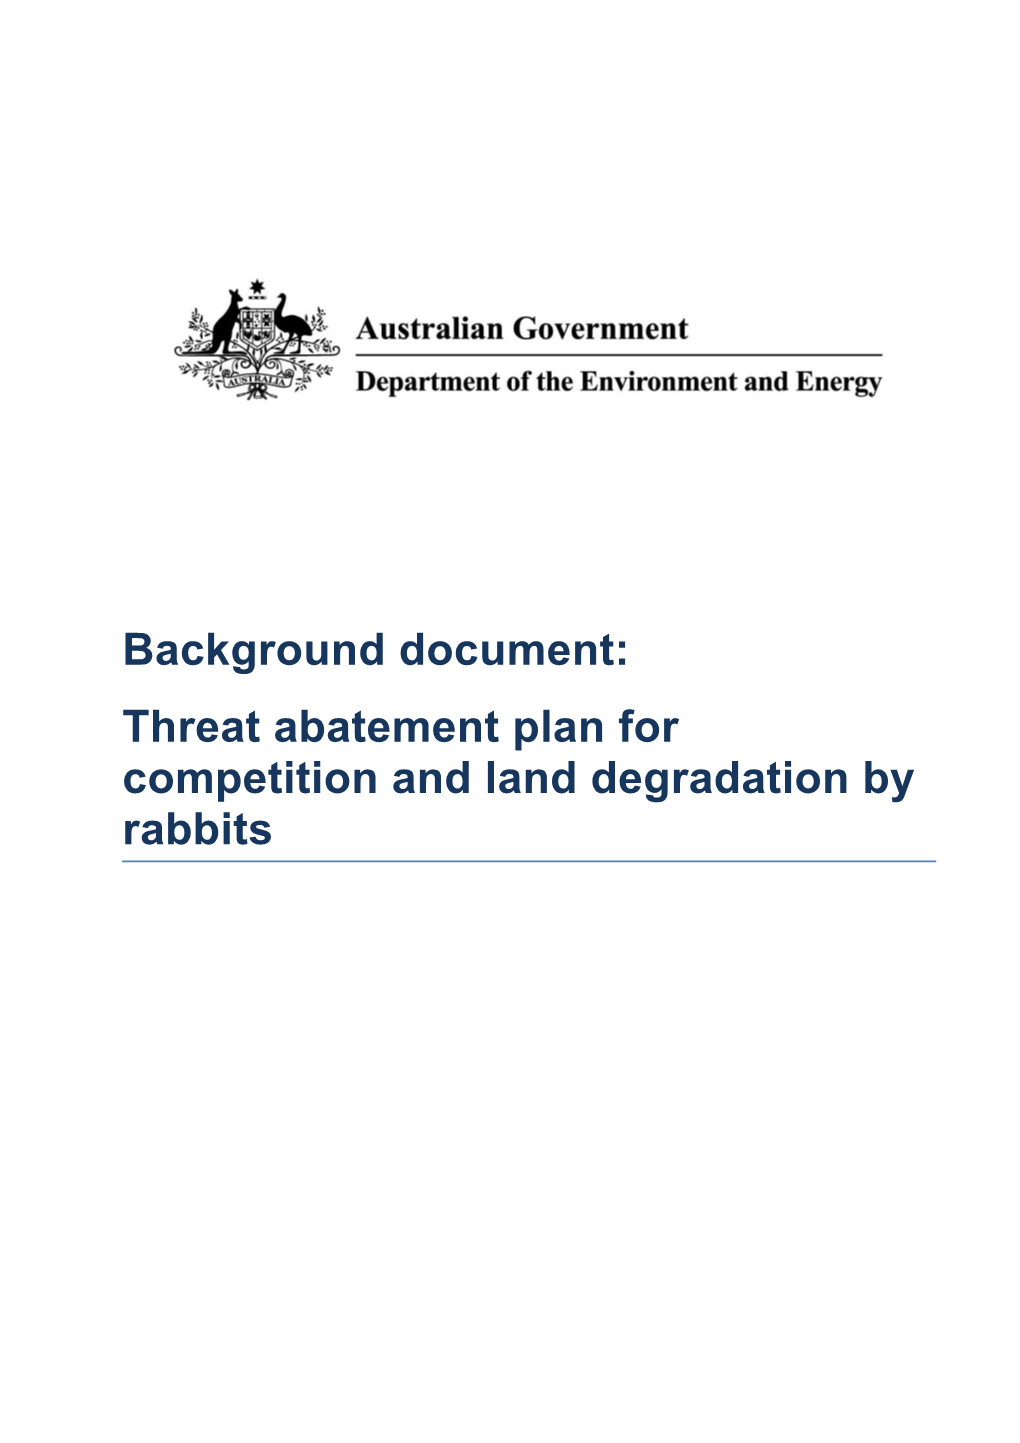 Background Document: Threat Abatement Plan for Competition and Land Degradation by Rabbits